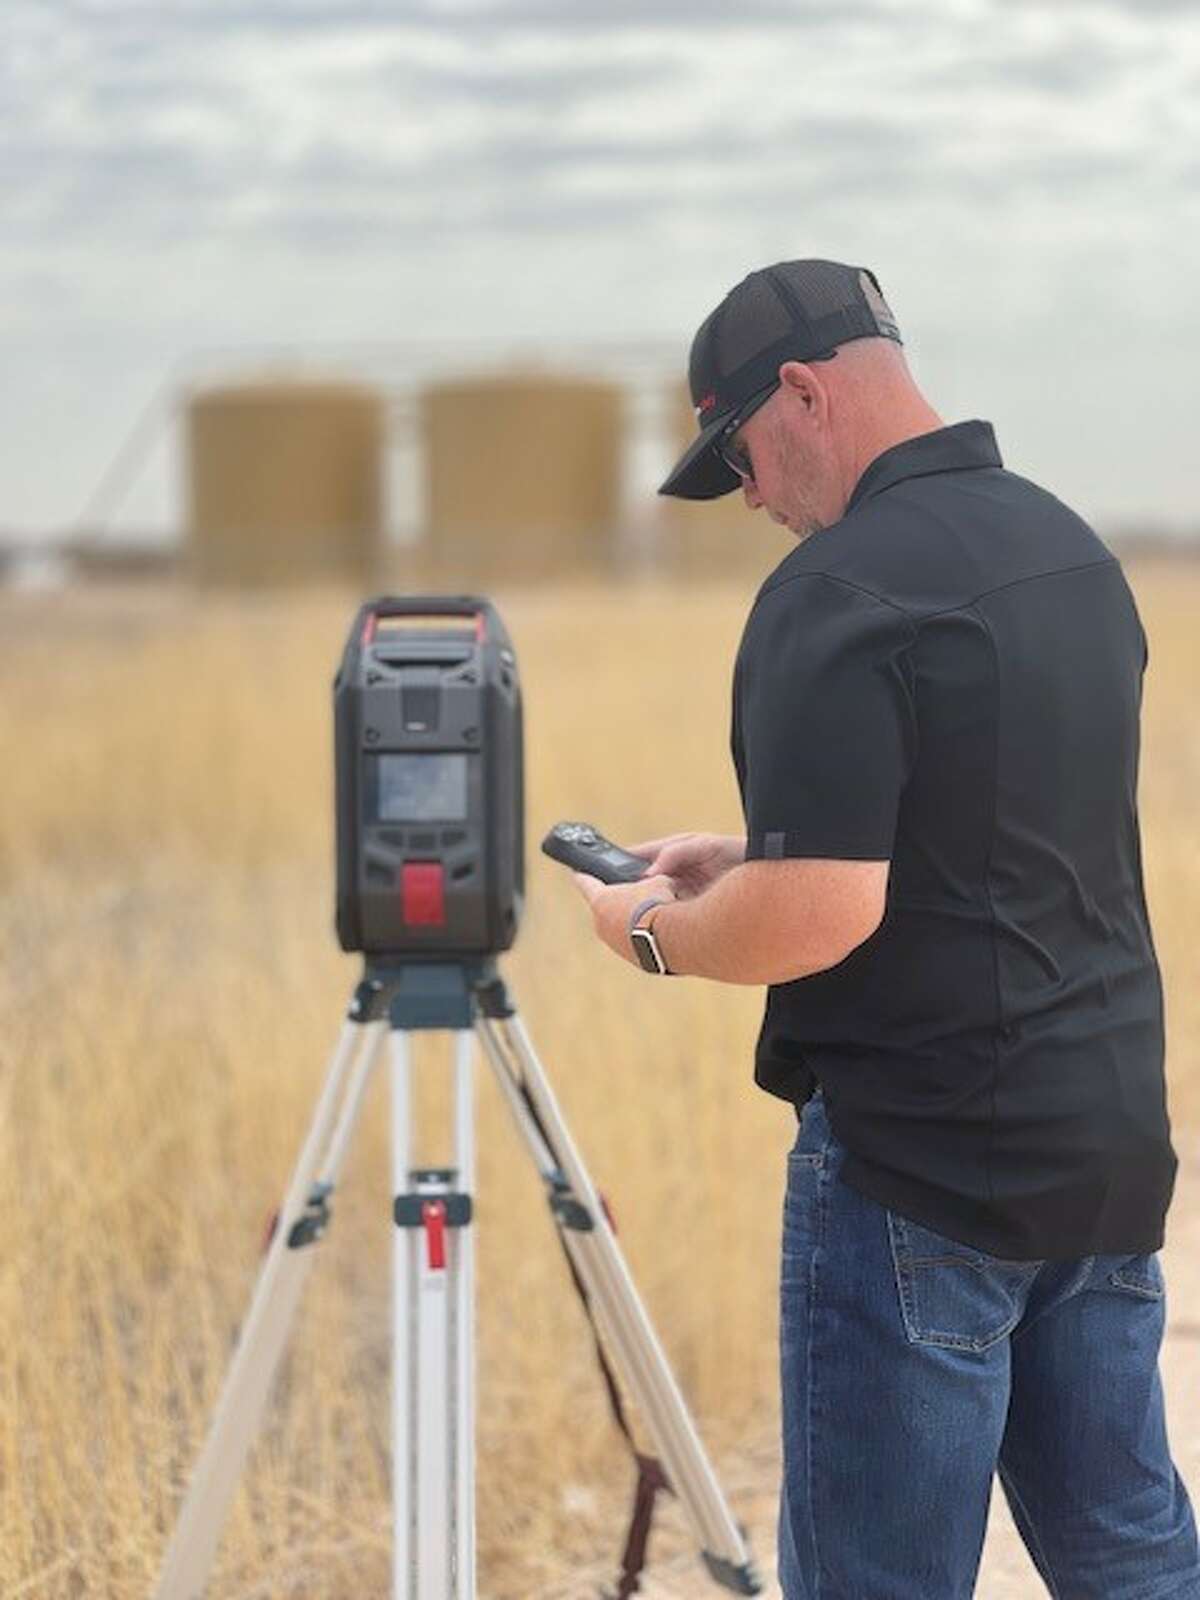 Jesse Wycoff, regional sales manager, West Texas and New Mexico for Blackline Safety, sets up an external EXO area monitor and G7C personal monitor to read gas remotely in West Texas for a customer evaluation.